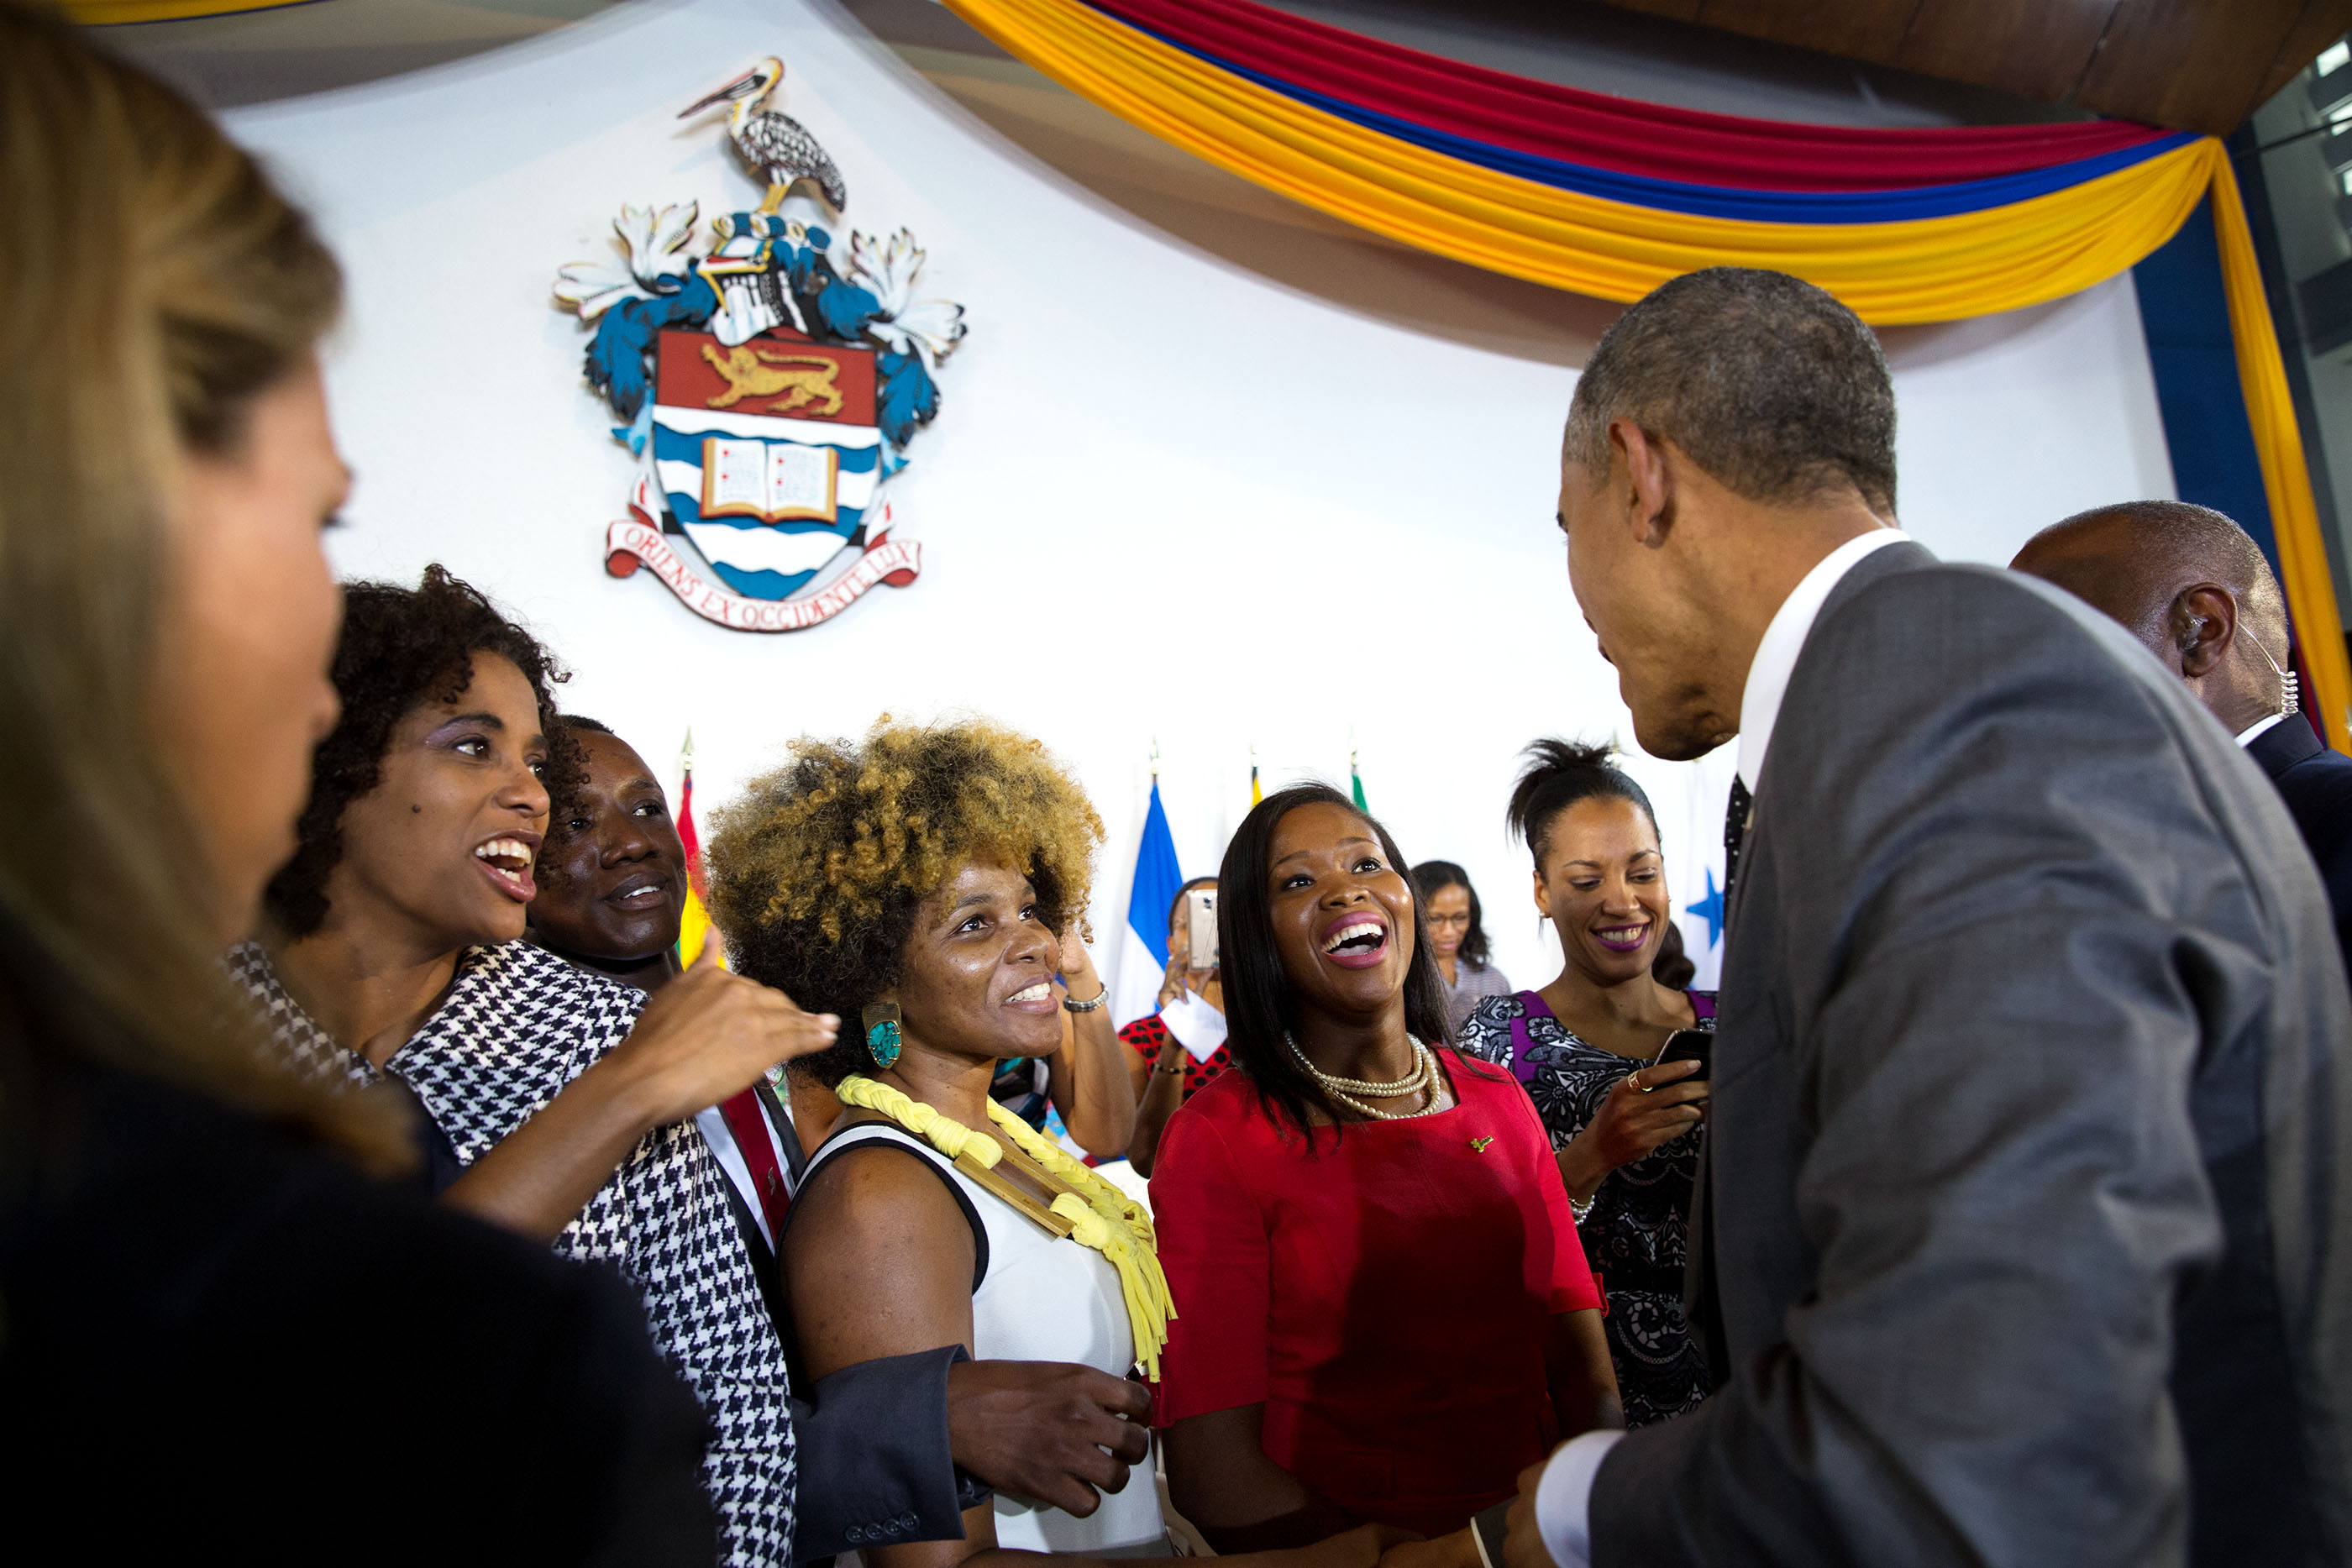 The President greets audience members following the town hall. (Official White House Photo by Pete Souza)